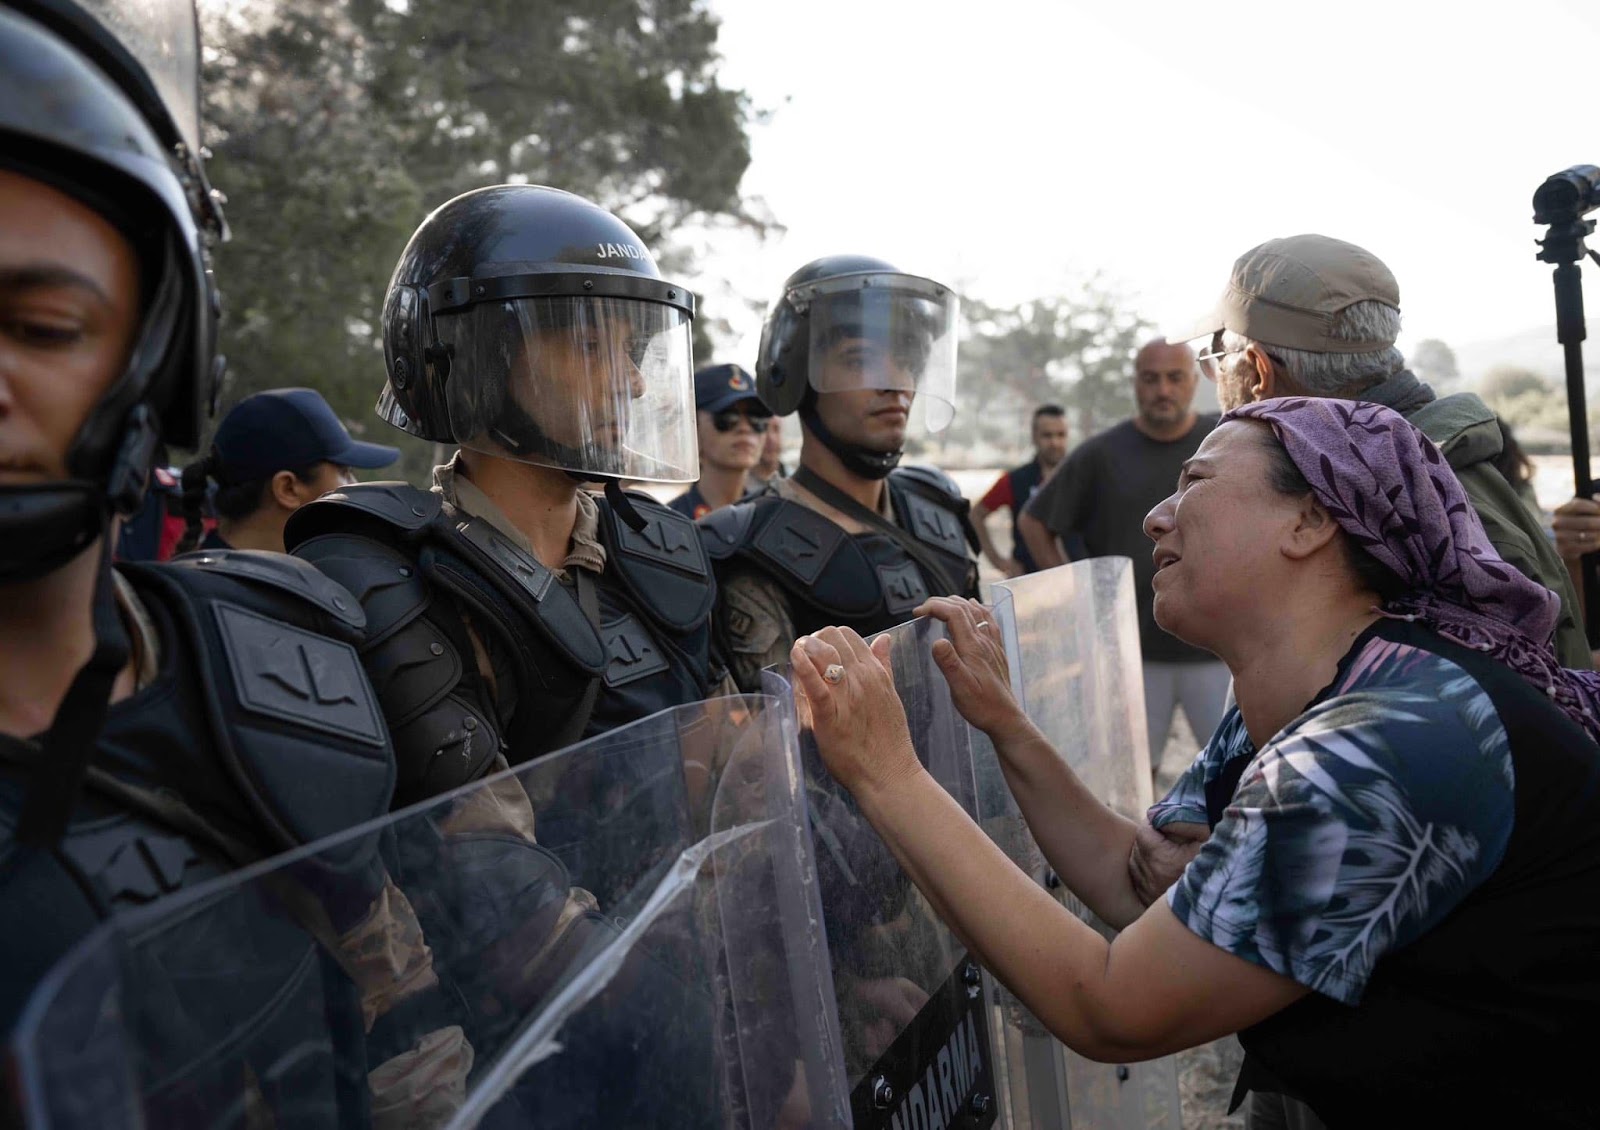 A Turkish villager woman pleads with a stone-faced police officer in riot gear.